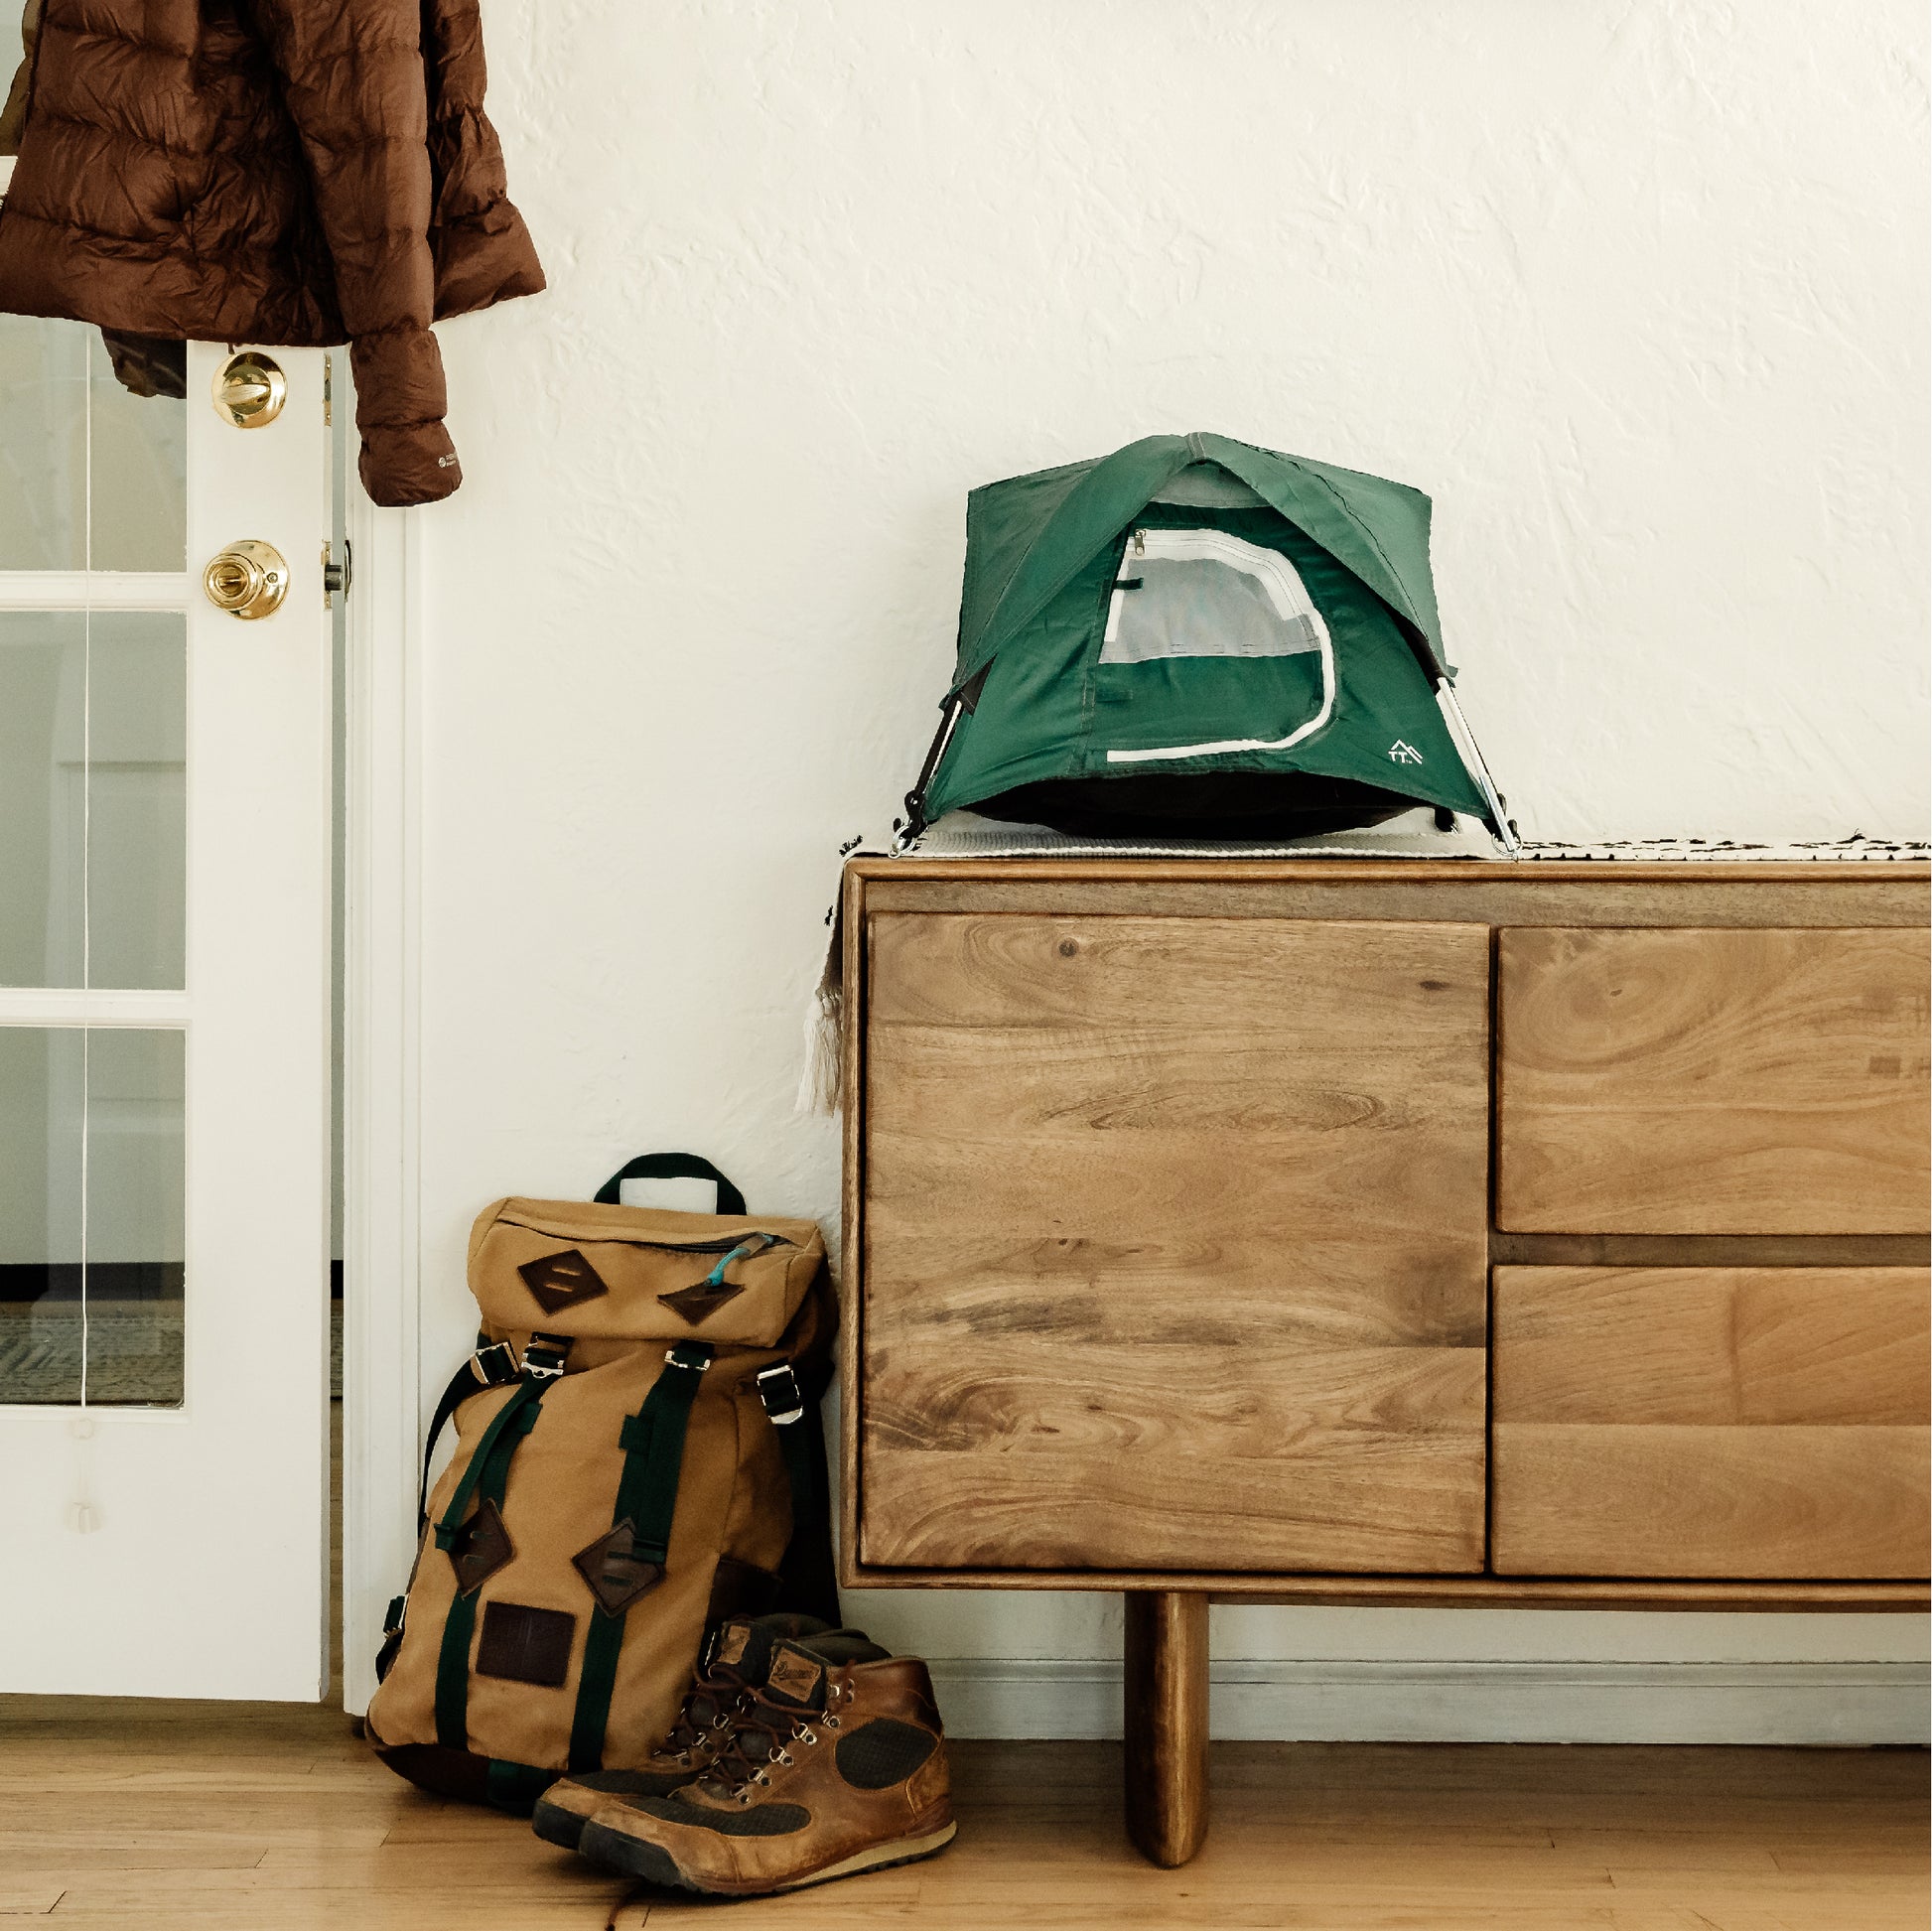 Green tiny tent shown up in the entryway of a home.  There is a backpack and hiking shoes in the image.